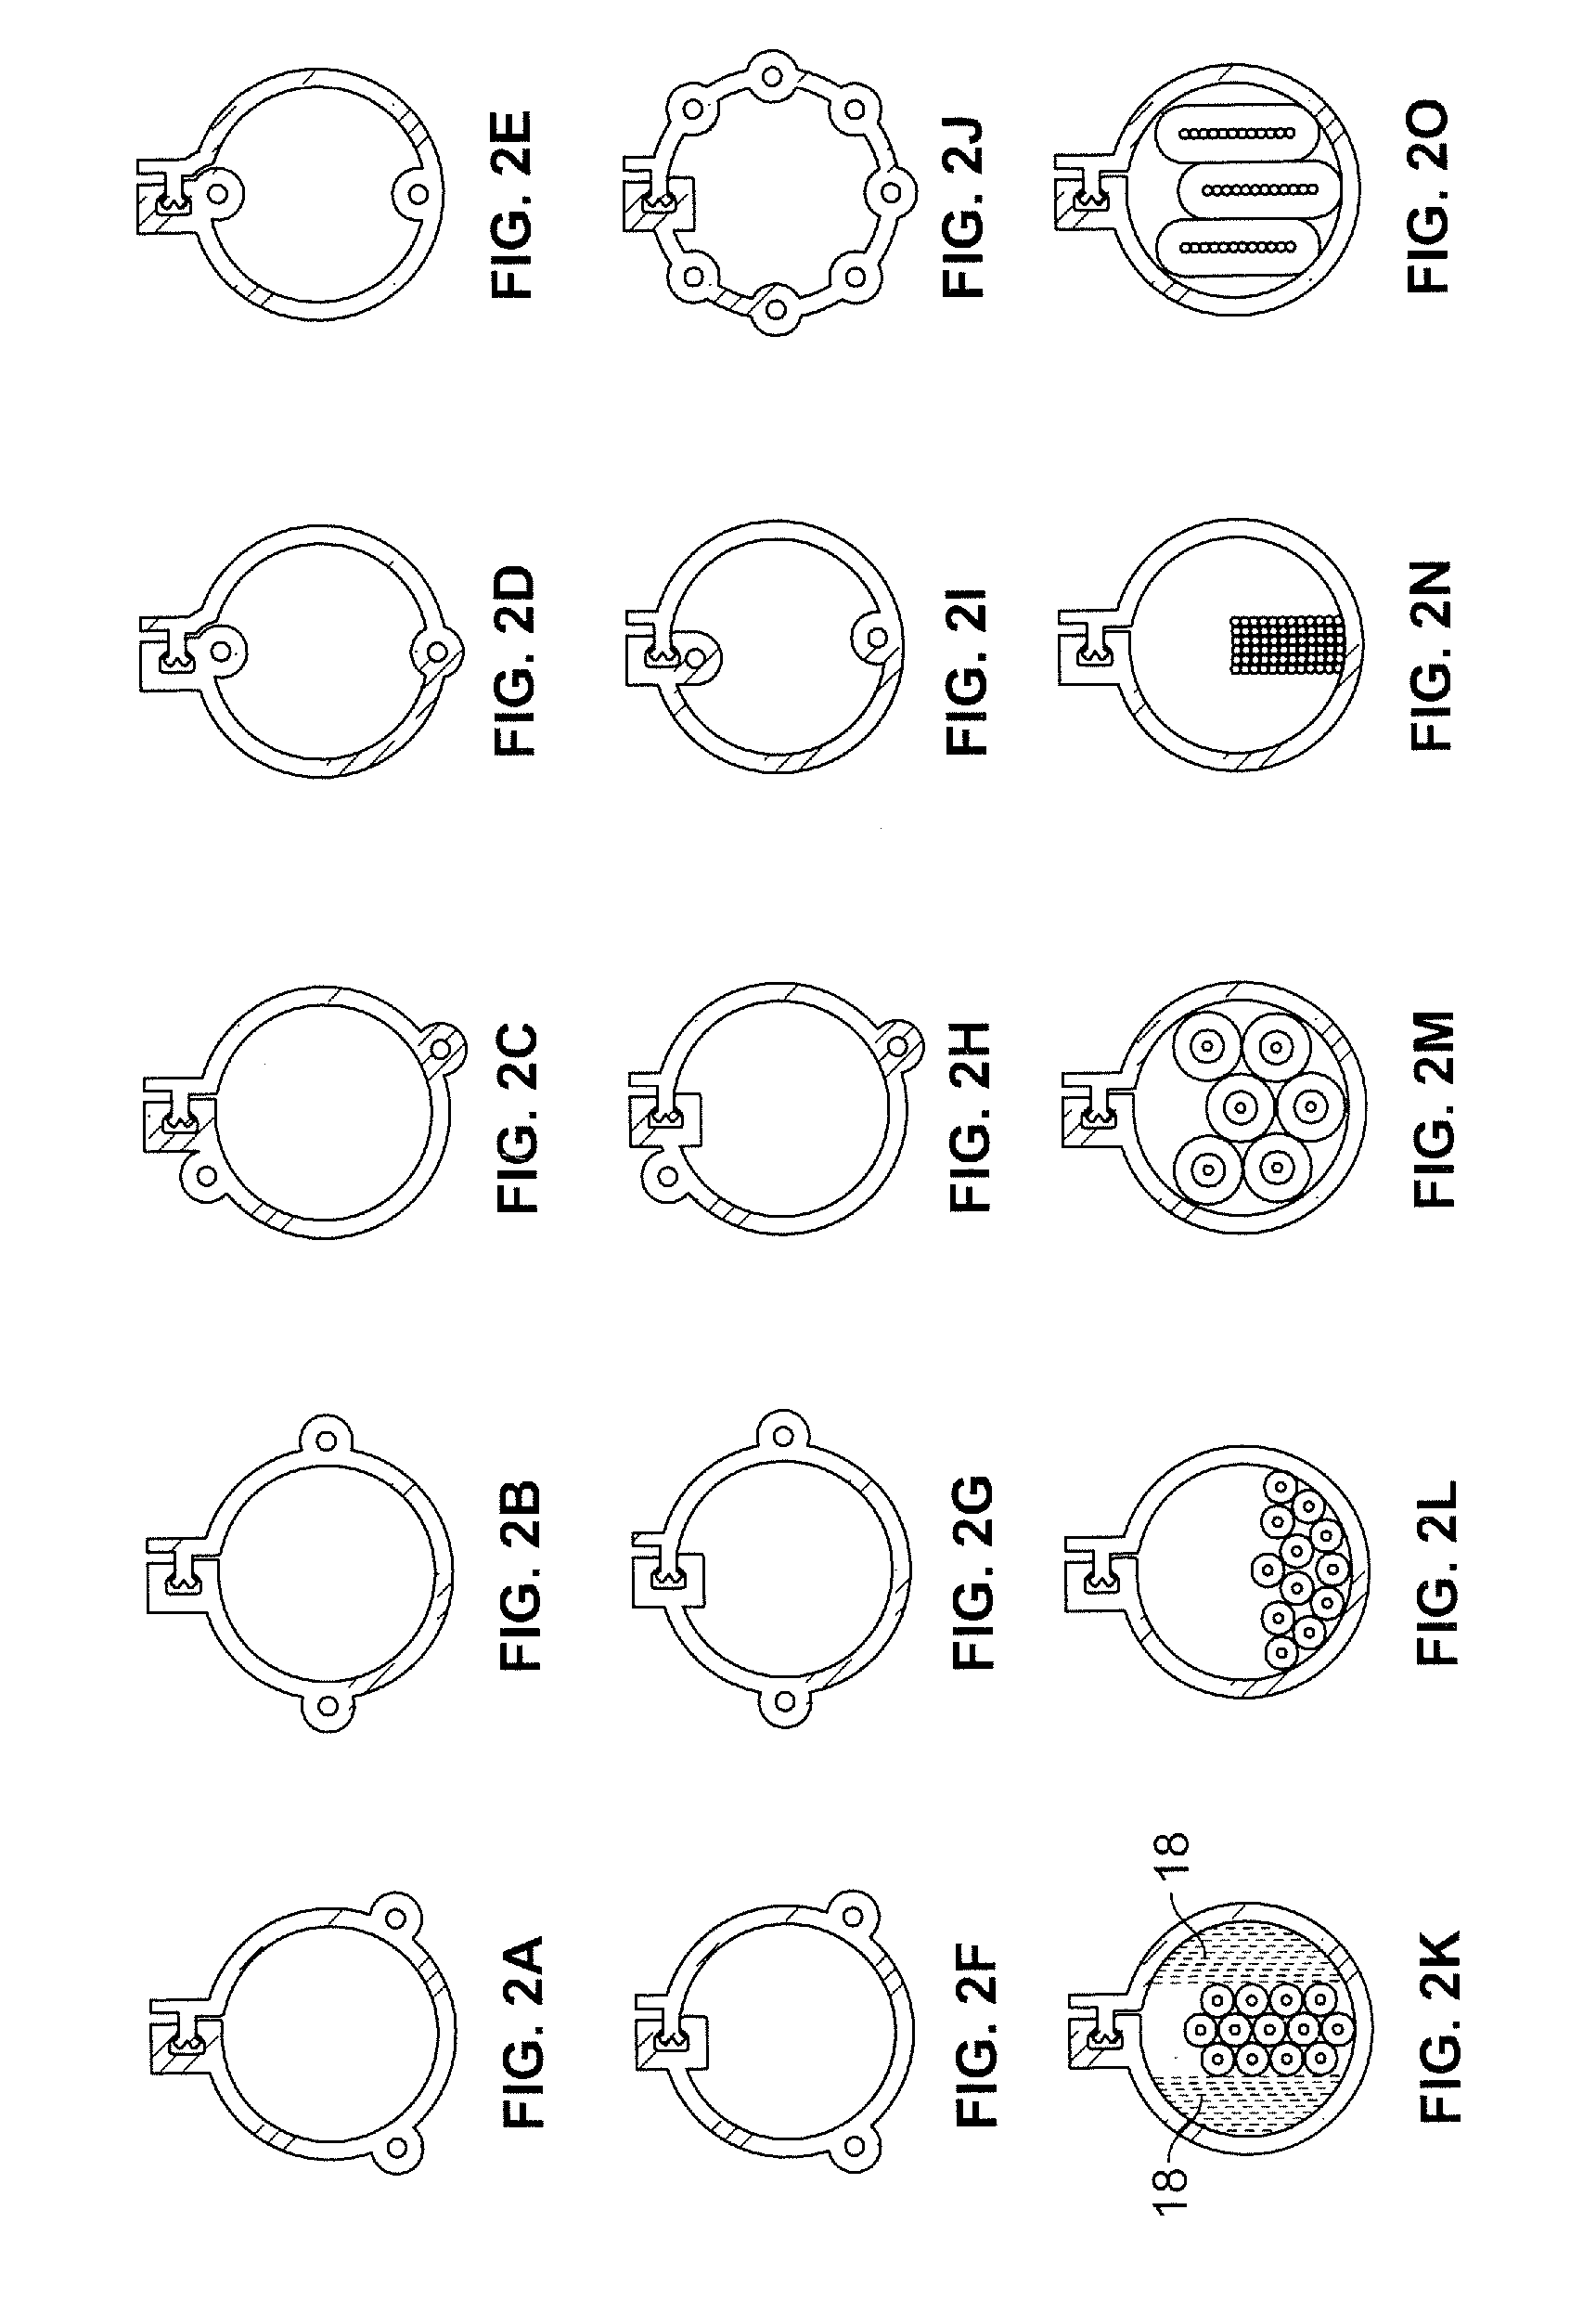 Fiber optic multi dwelling unit deployment appartus and methods for using the same